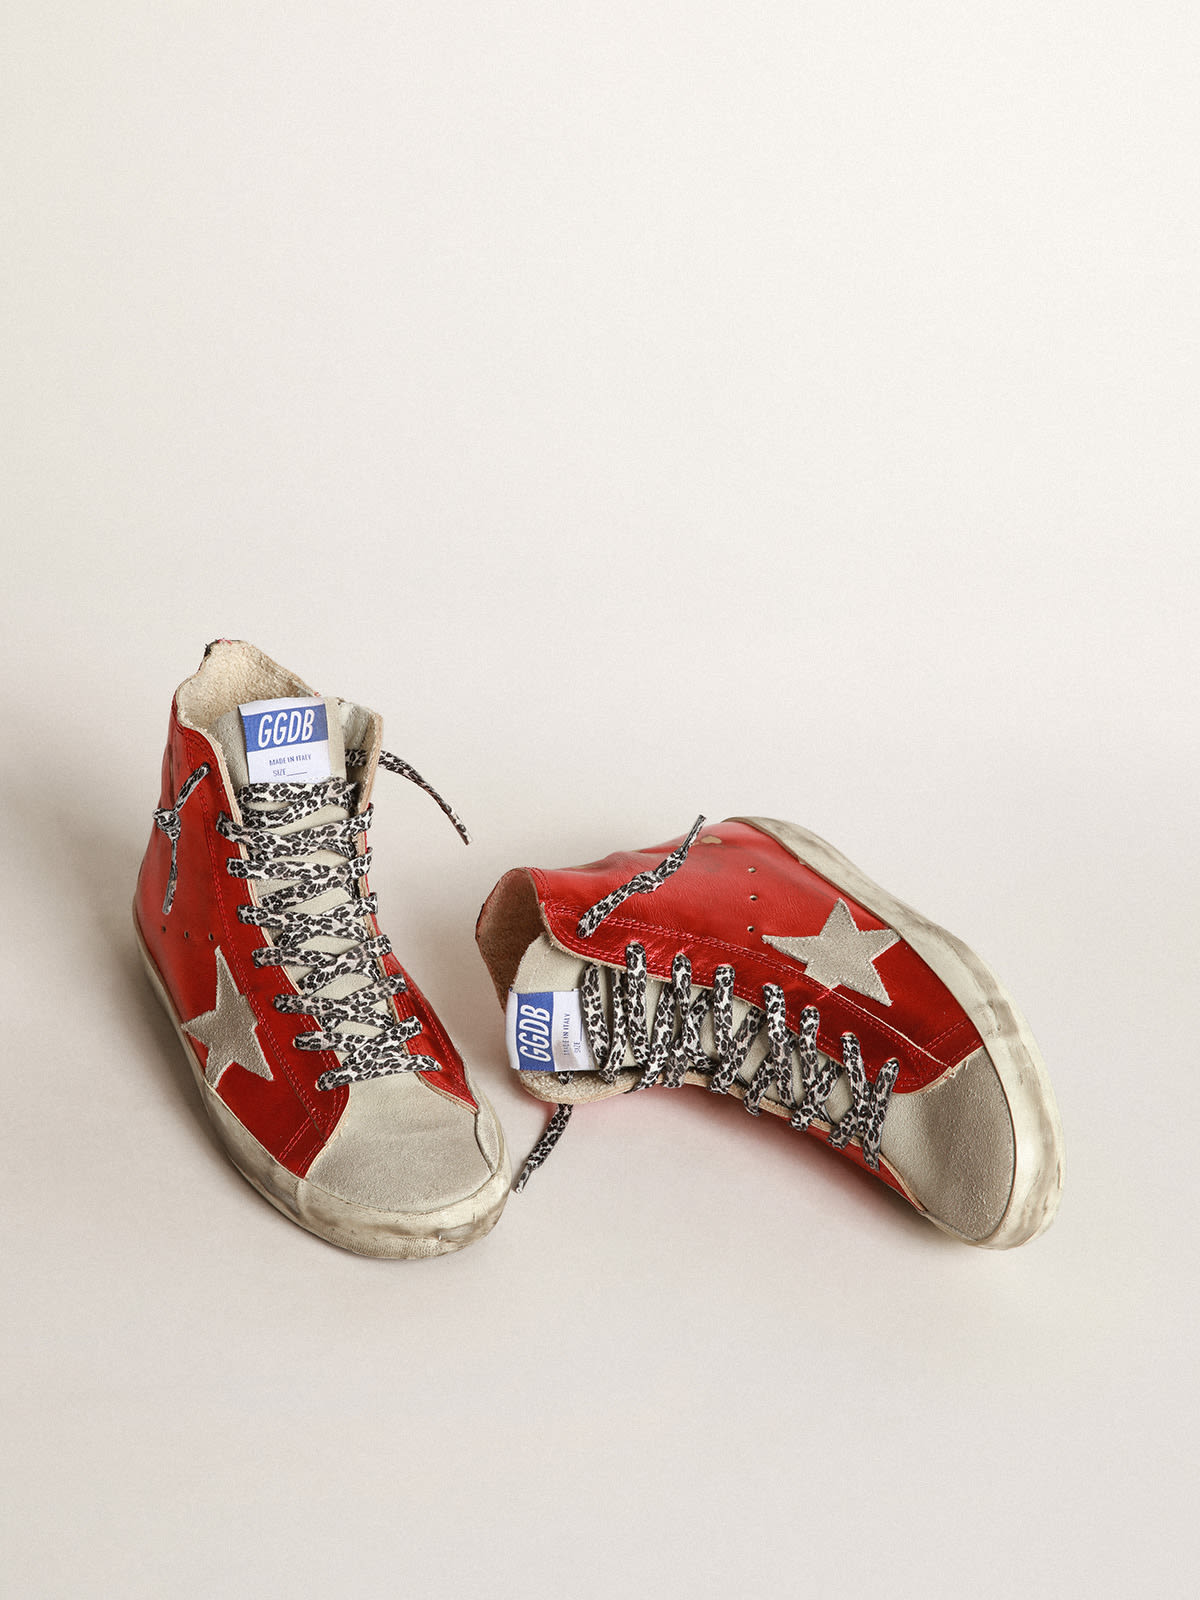 Golden Goose - Francy sneakers in red laminated leather with leopard-print laces in 